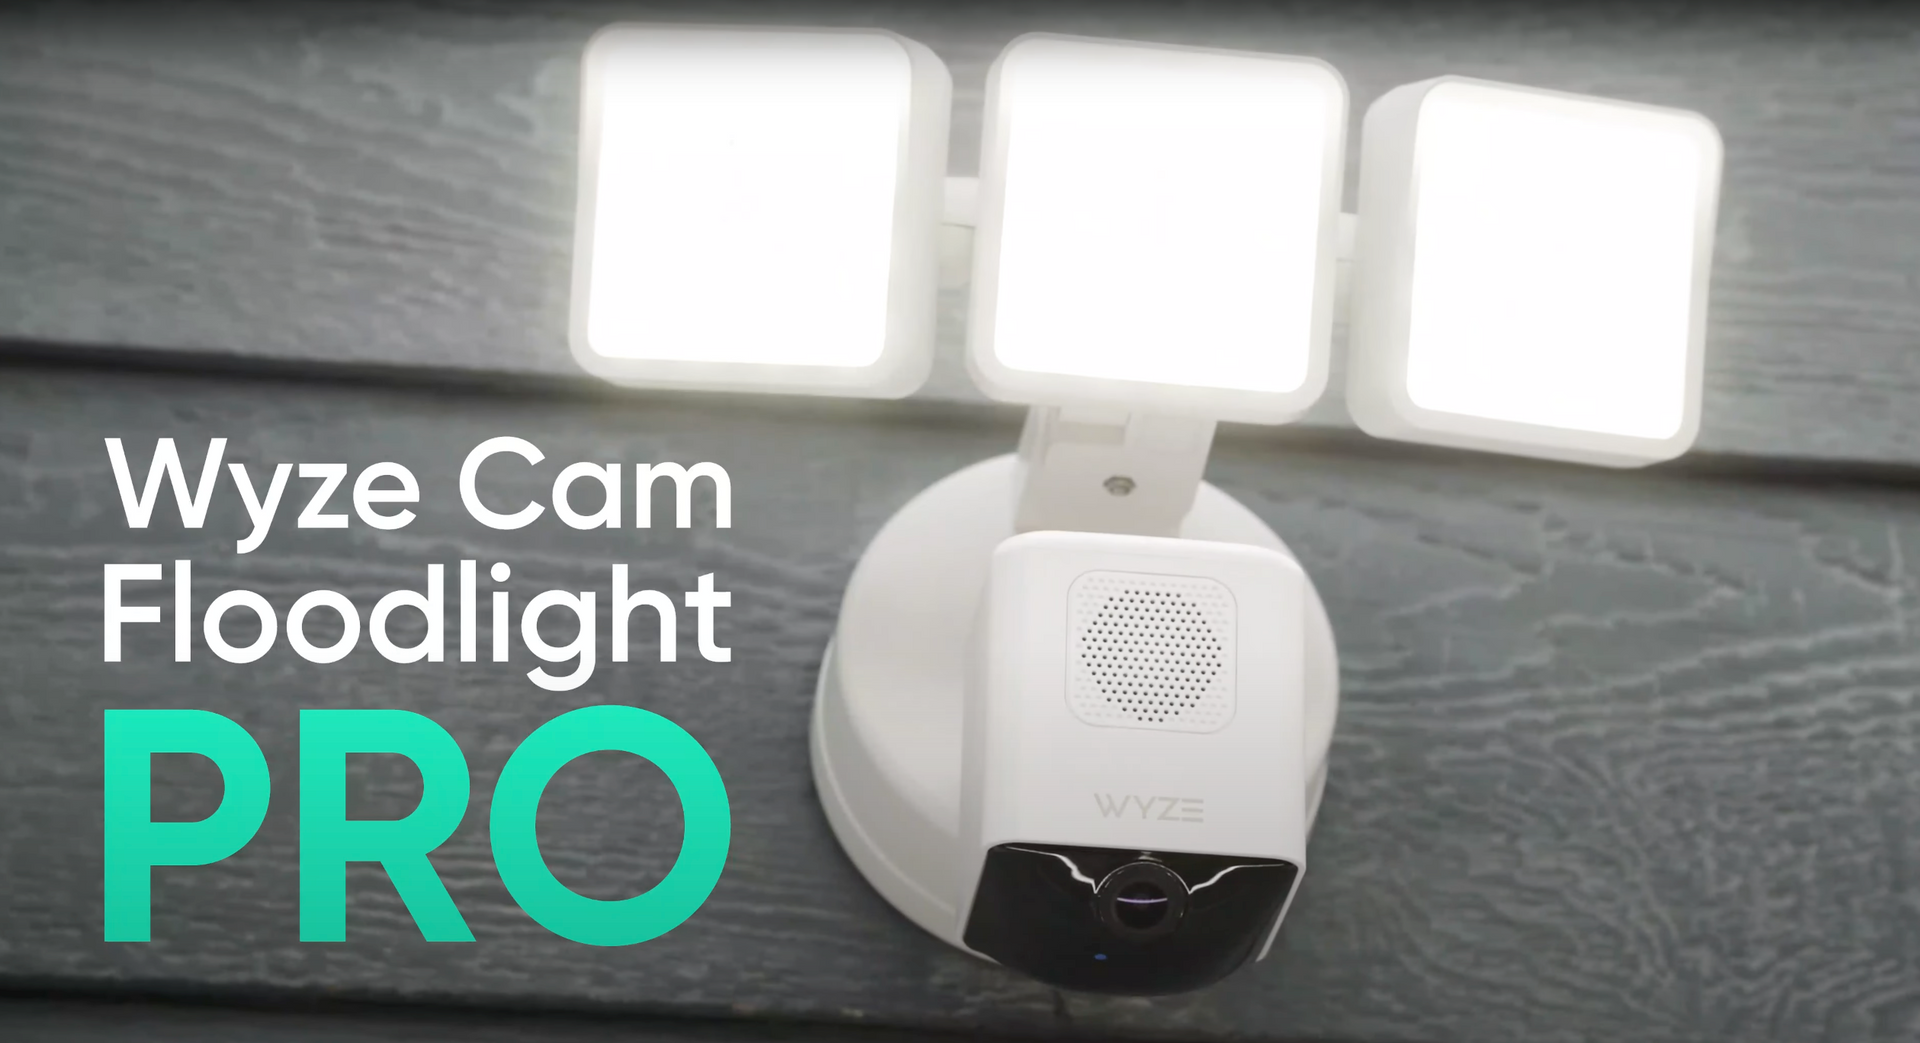 Load video: Wyze Floodlight Pro video commercial